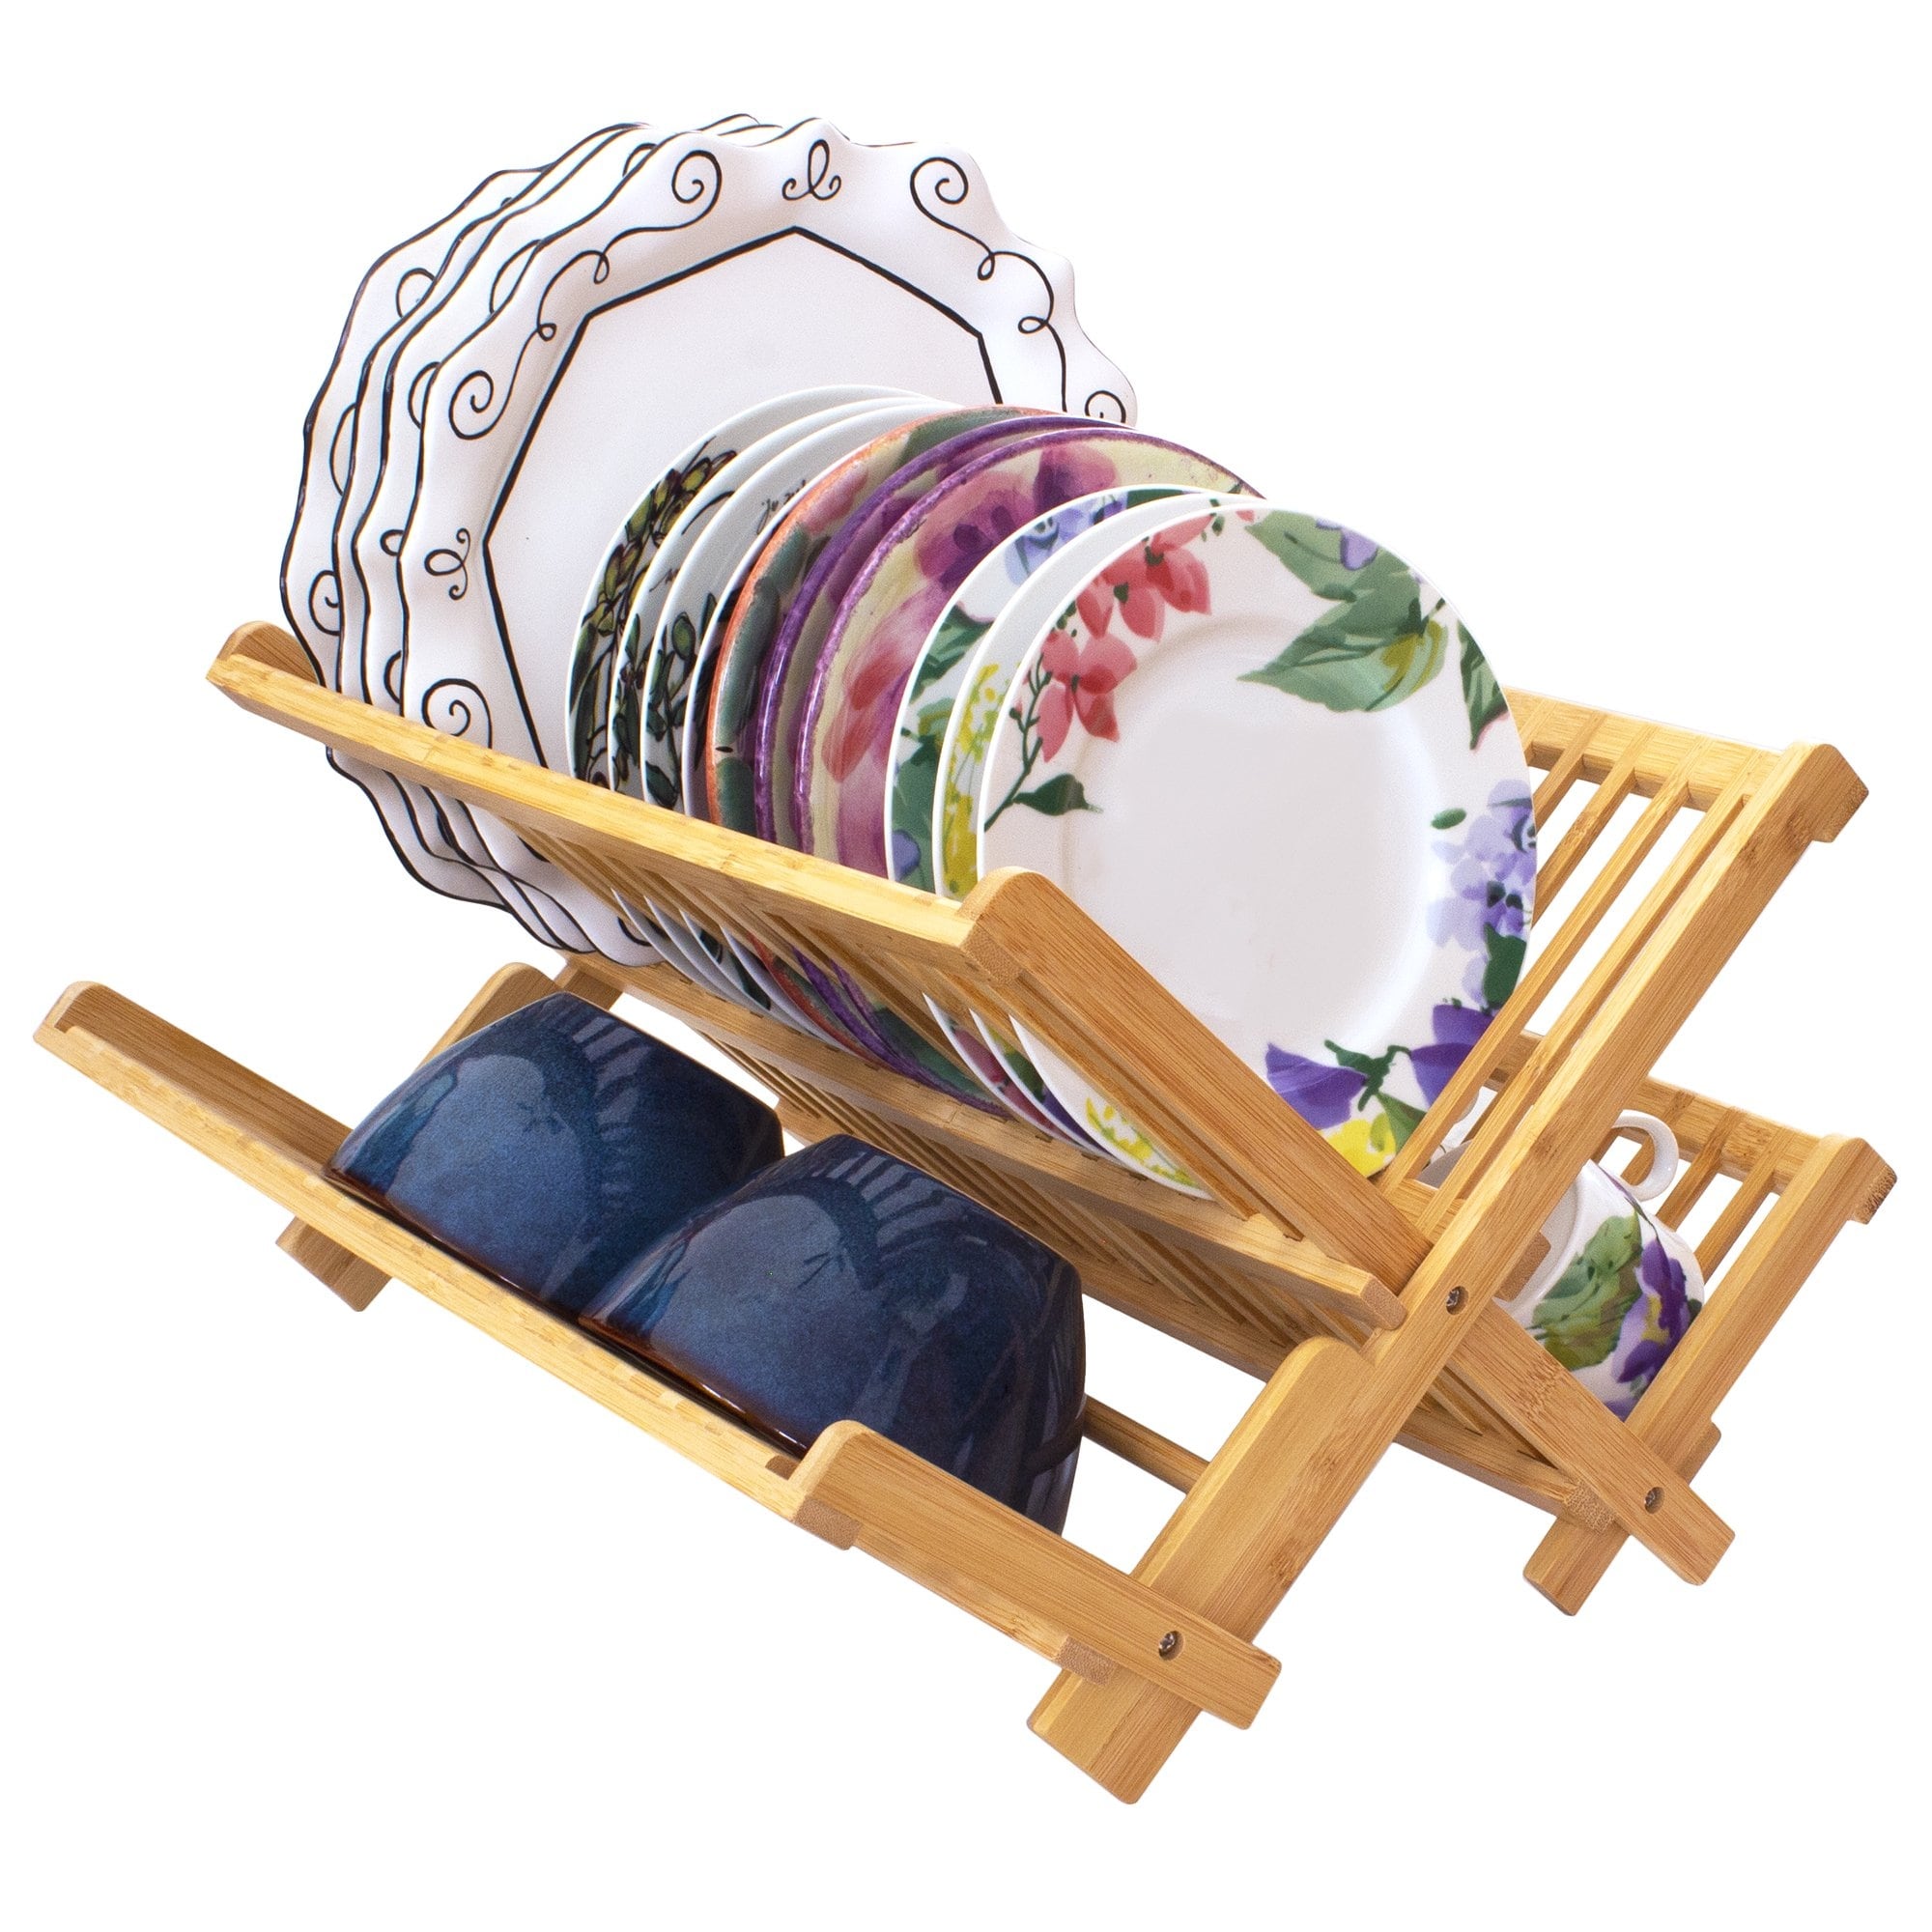 https://ak1.ostkcdn.com/images/products/is/images/direct/8ba673b1260298861372afb87222c53b5ccd729a/Collapsible-Bamboo-Dish-Drying-Rack.jpg